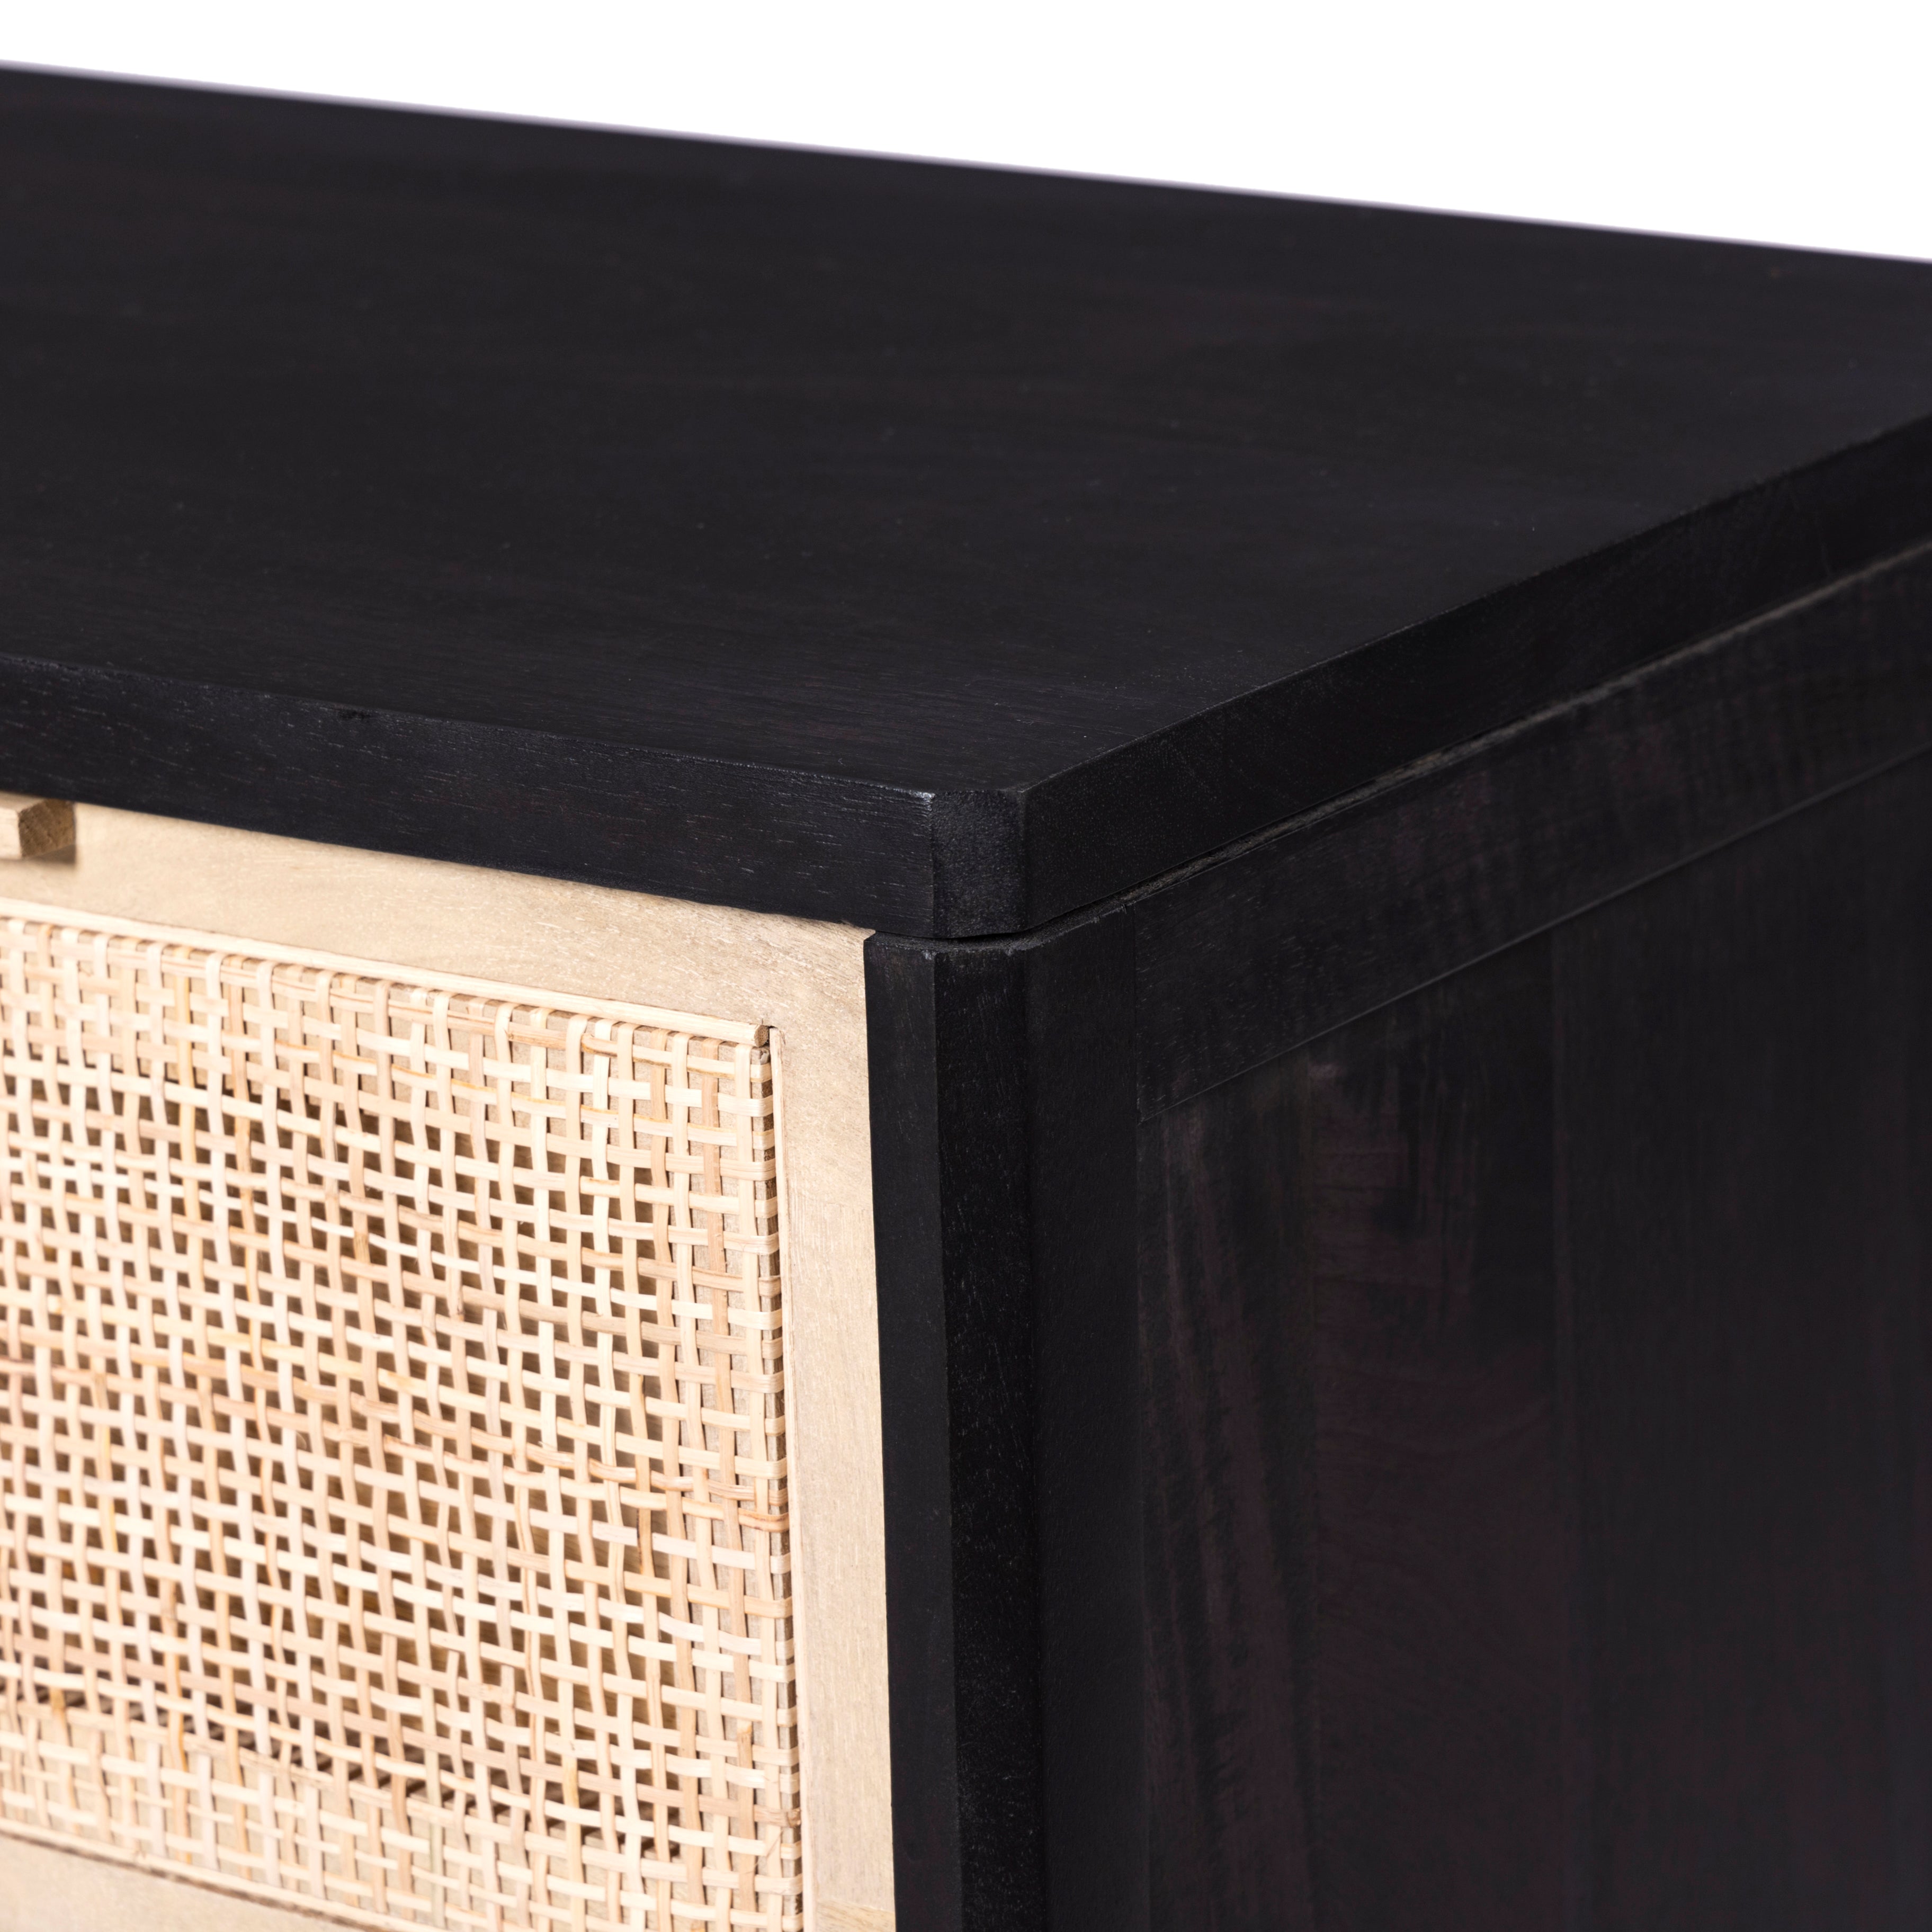 Natural mango encases nine spacious drawers of woven cane, for a textural look with eye-catching contrast. Amethyst Home provides interior design, new construction, custom furniture, and area rugs in the Houston metro area.